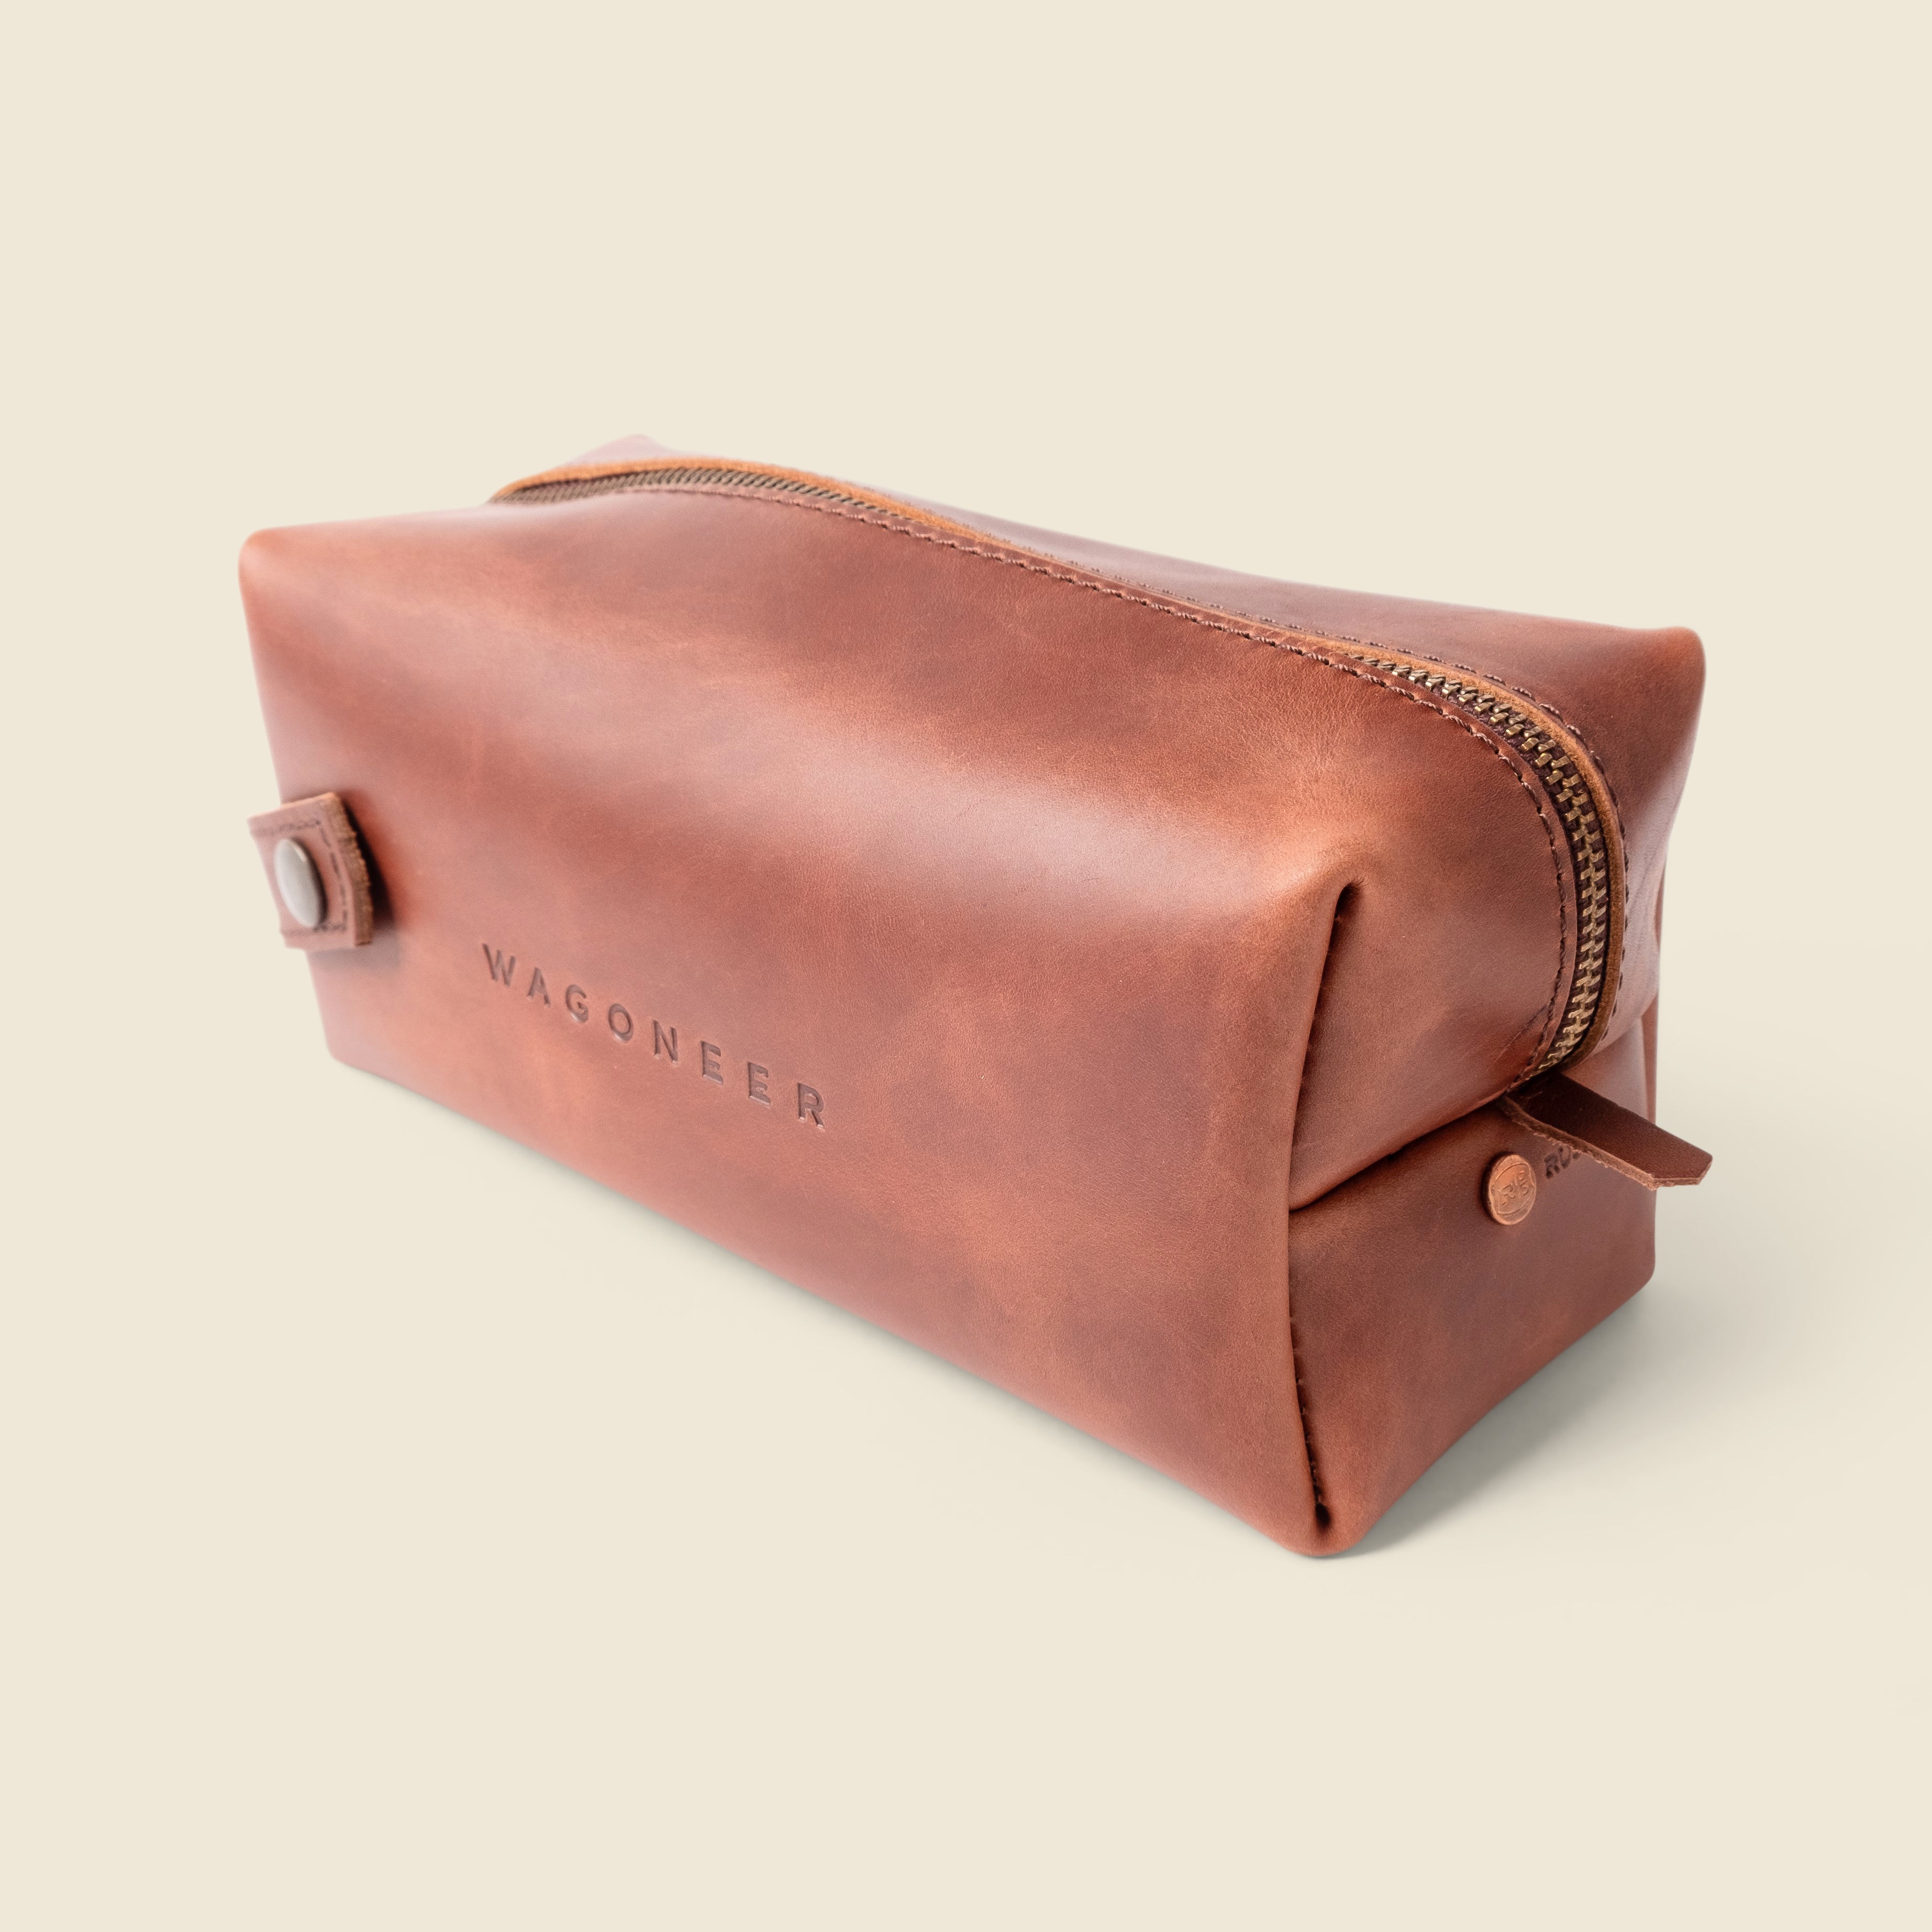 rustico corporate gift toiletry bag